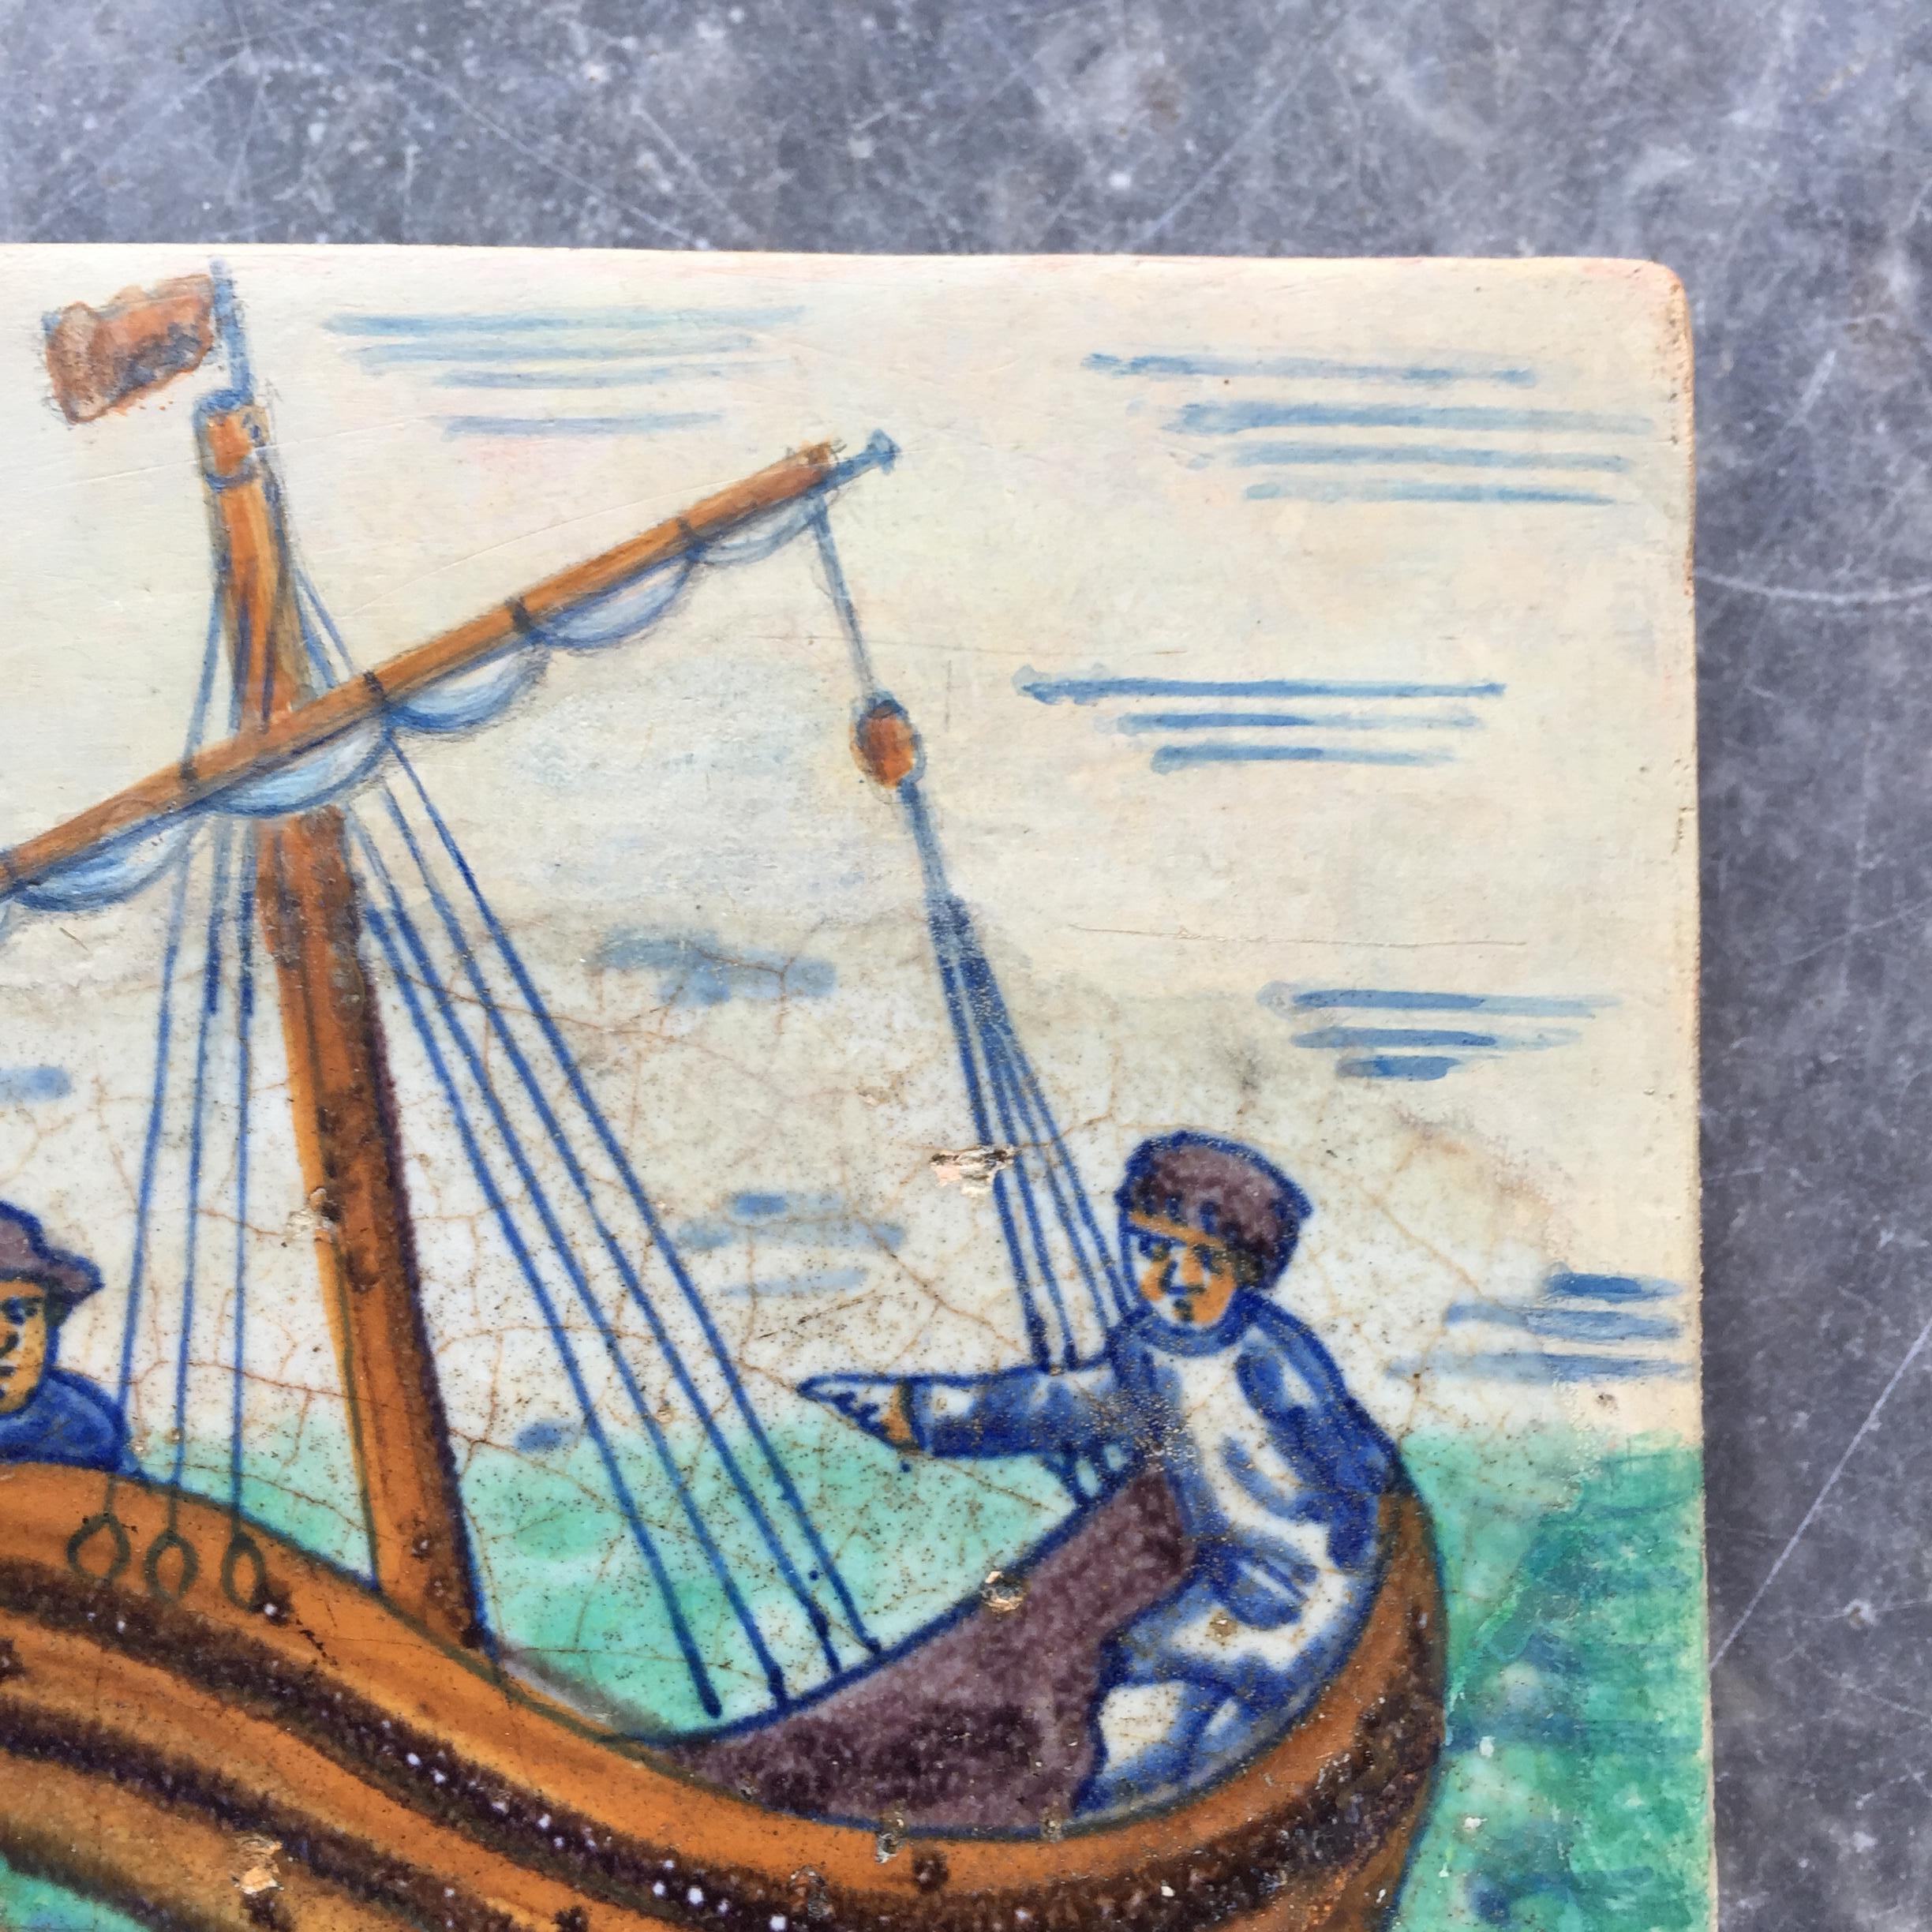 Renaissance Extremely Rare Rotterdammer Tile with Two Men in a Boat, Early 17th Century For Sale